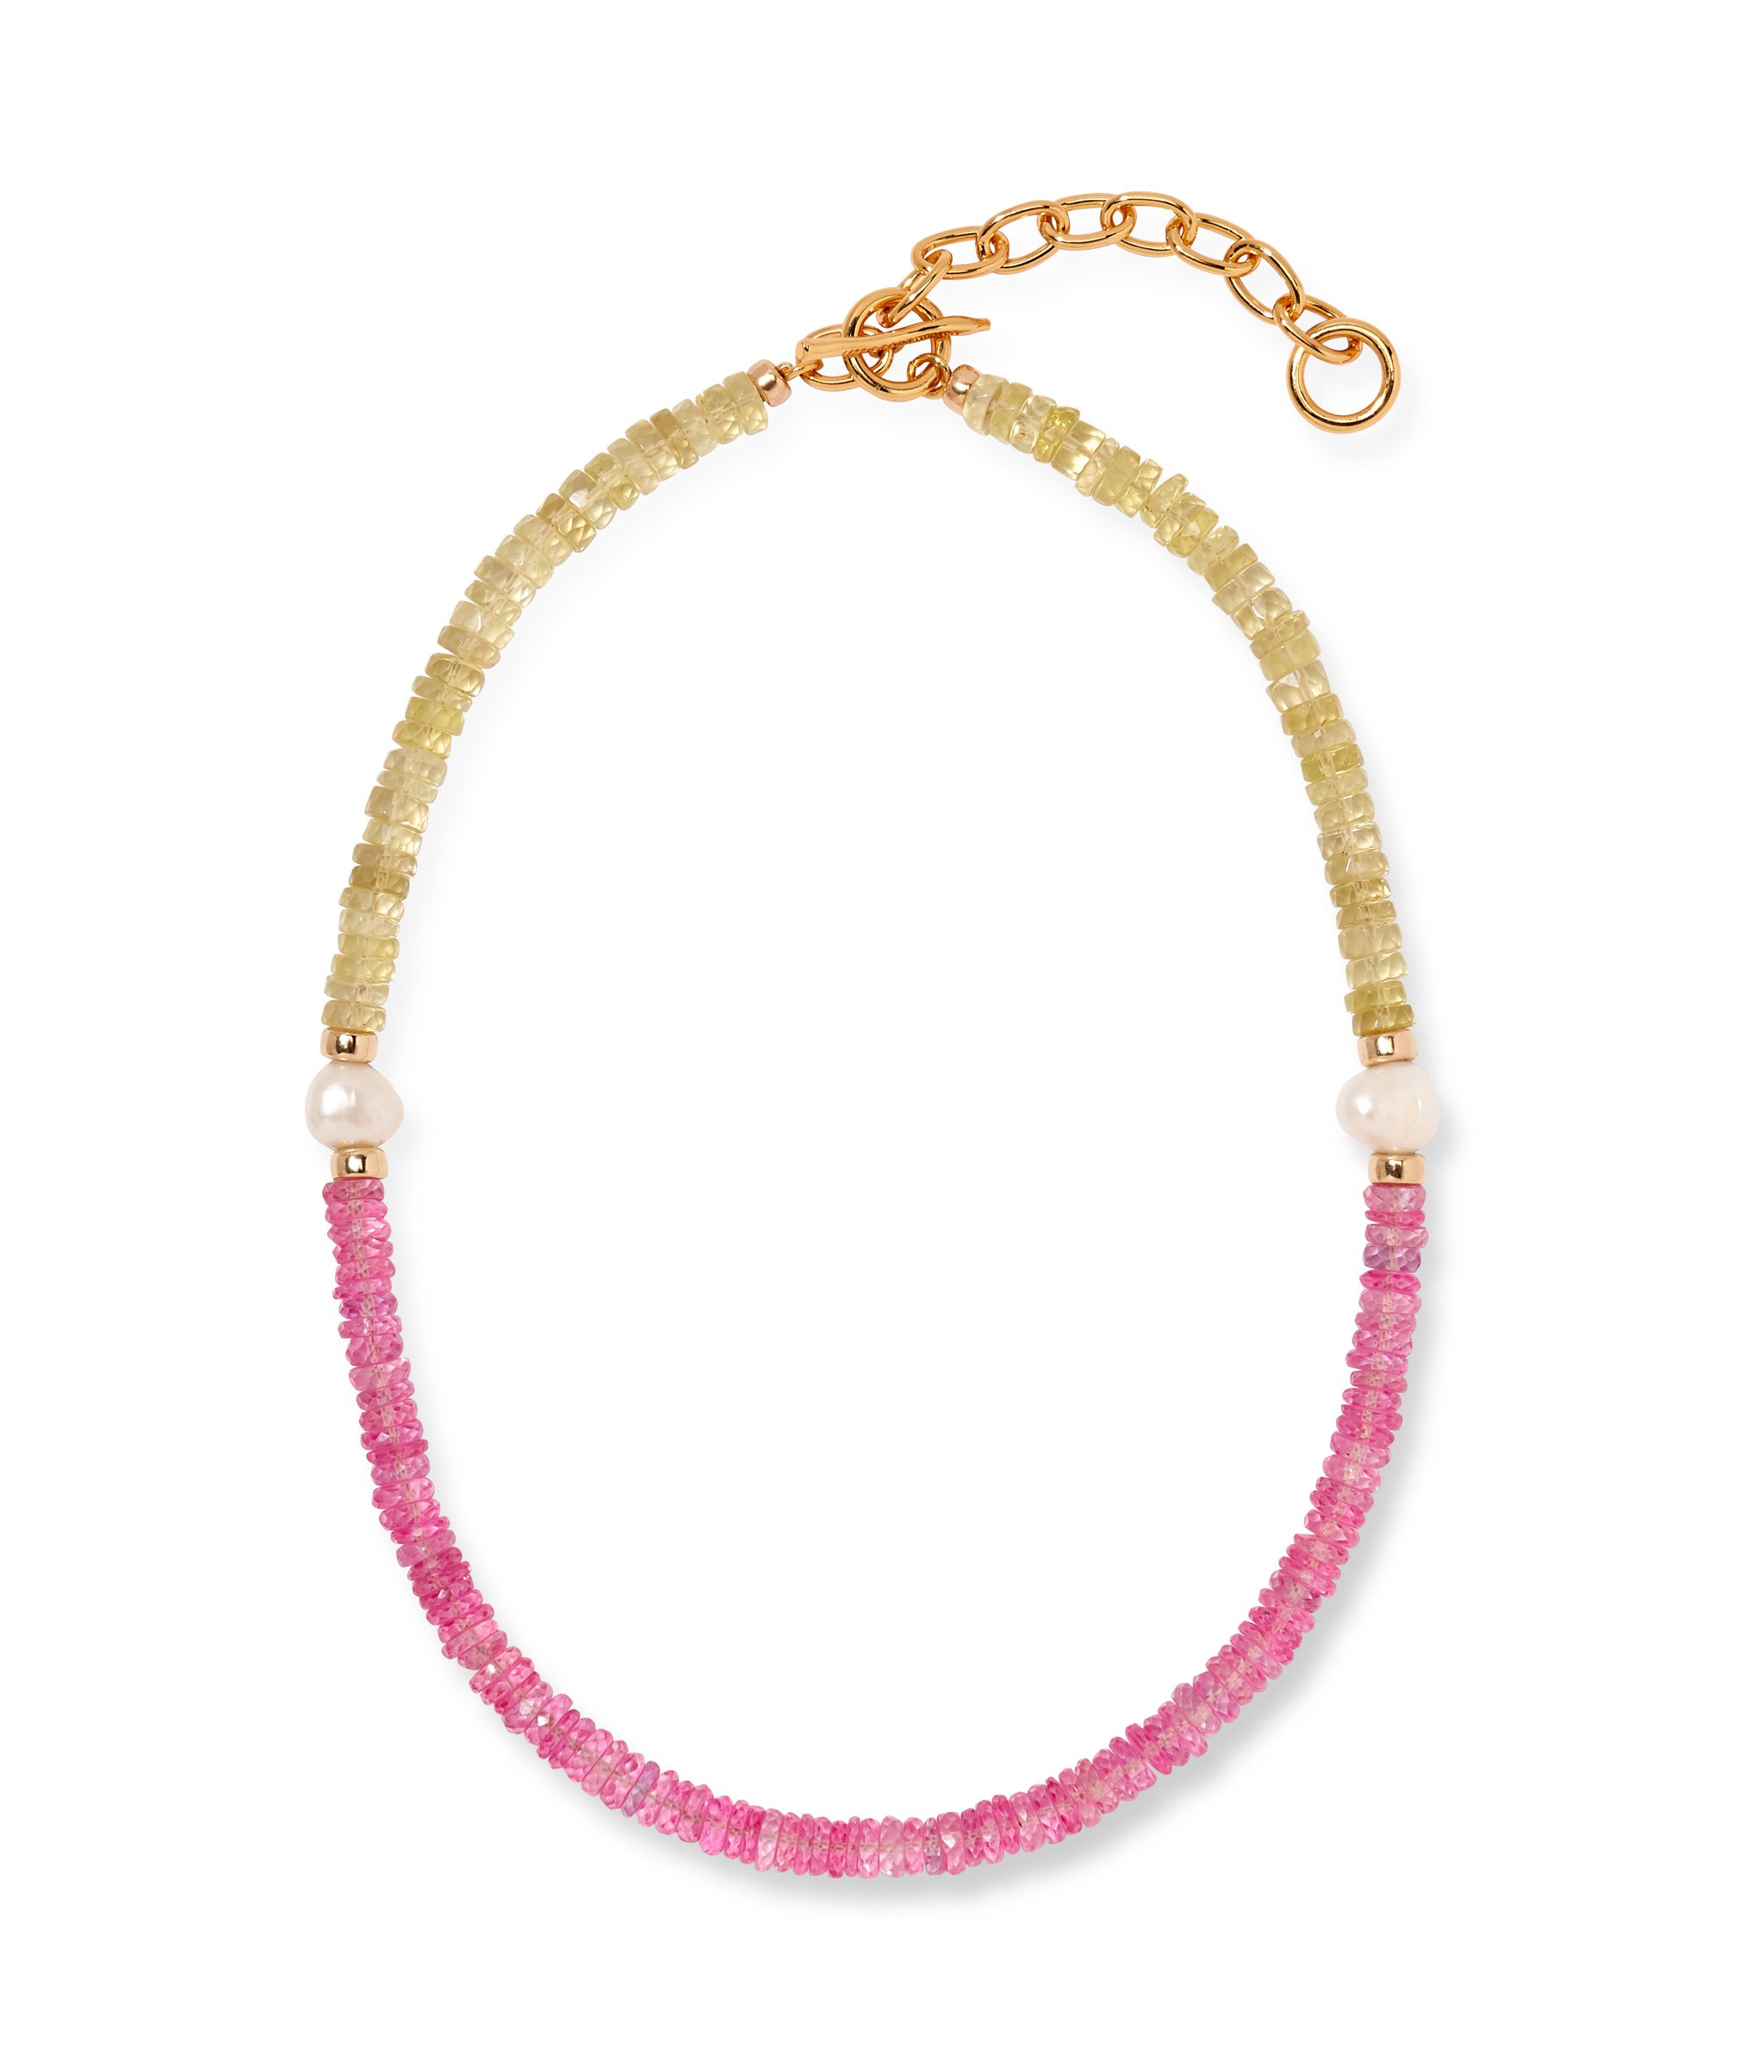 Rock Candy Necklace in Pink Lemonade. Color-blocked beads in pink topaz and lemon quartz with pearl accents.